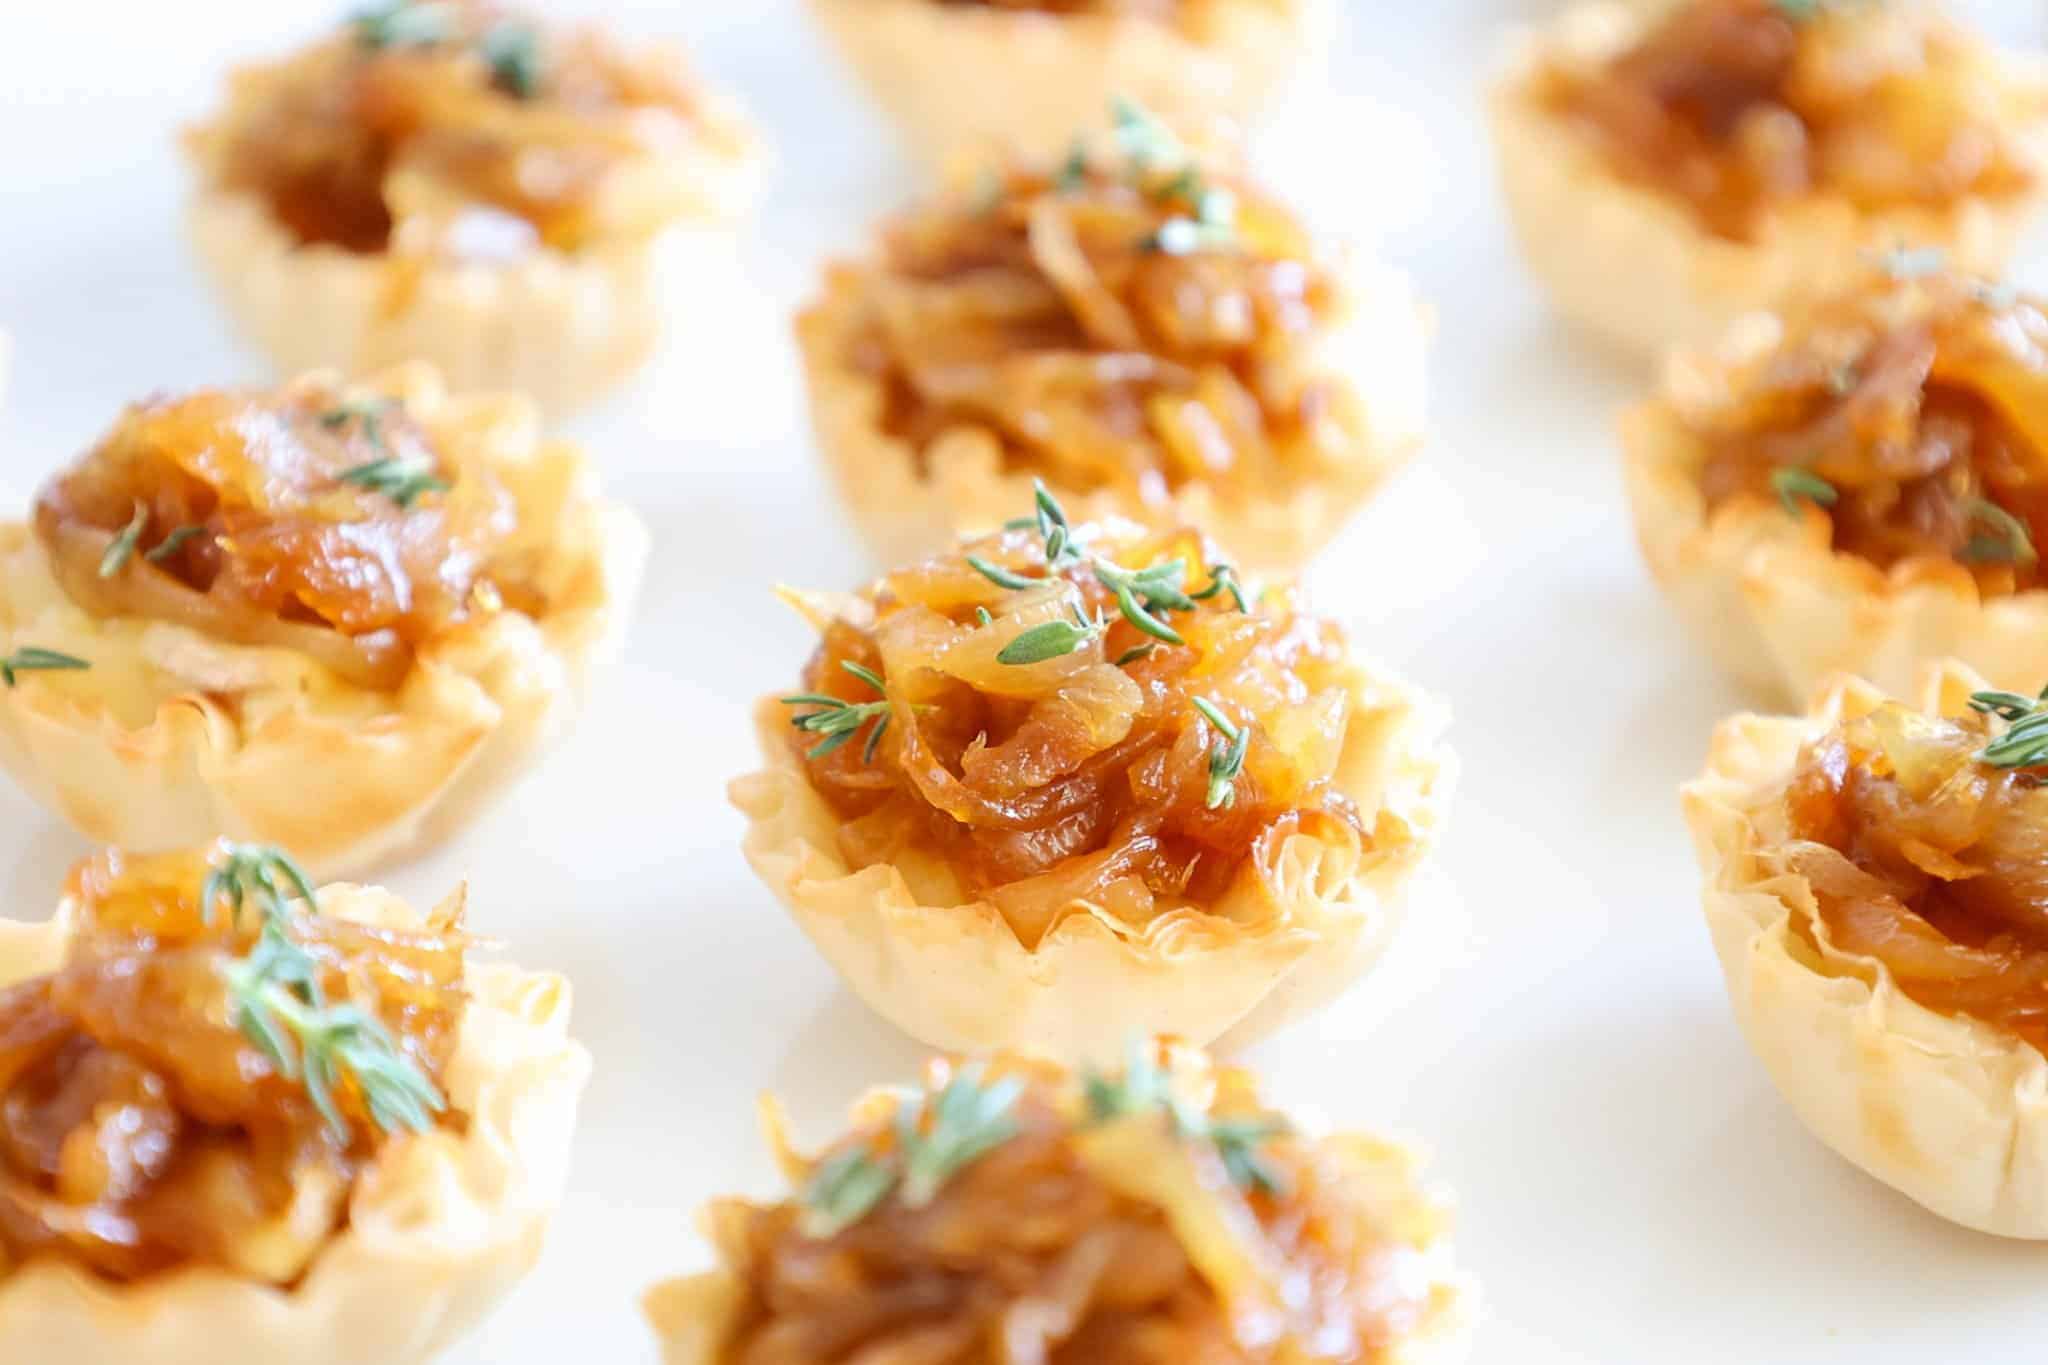 Caramelized Onion and Brie Bites